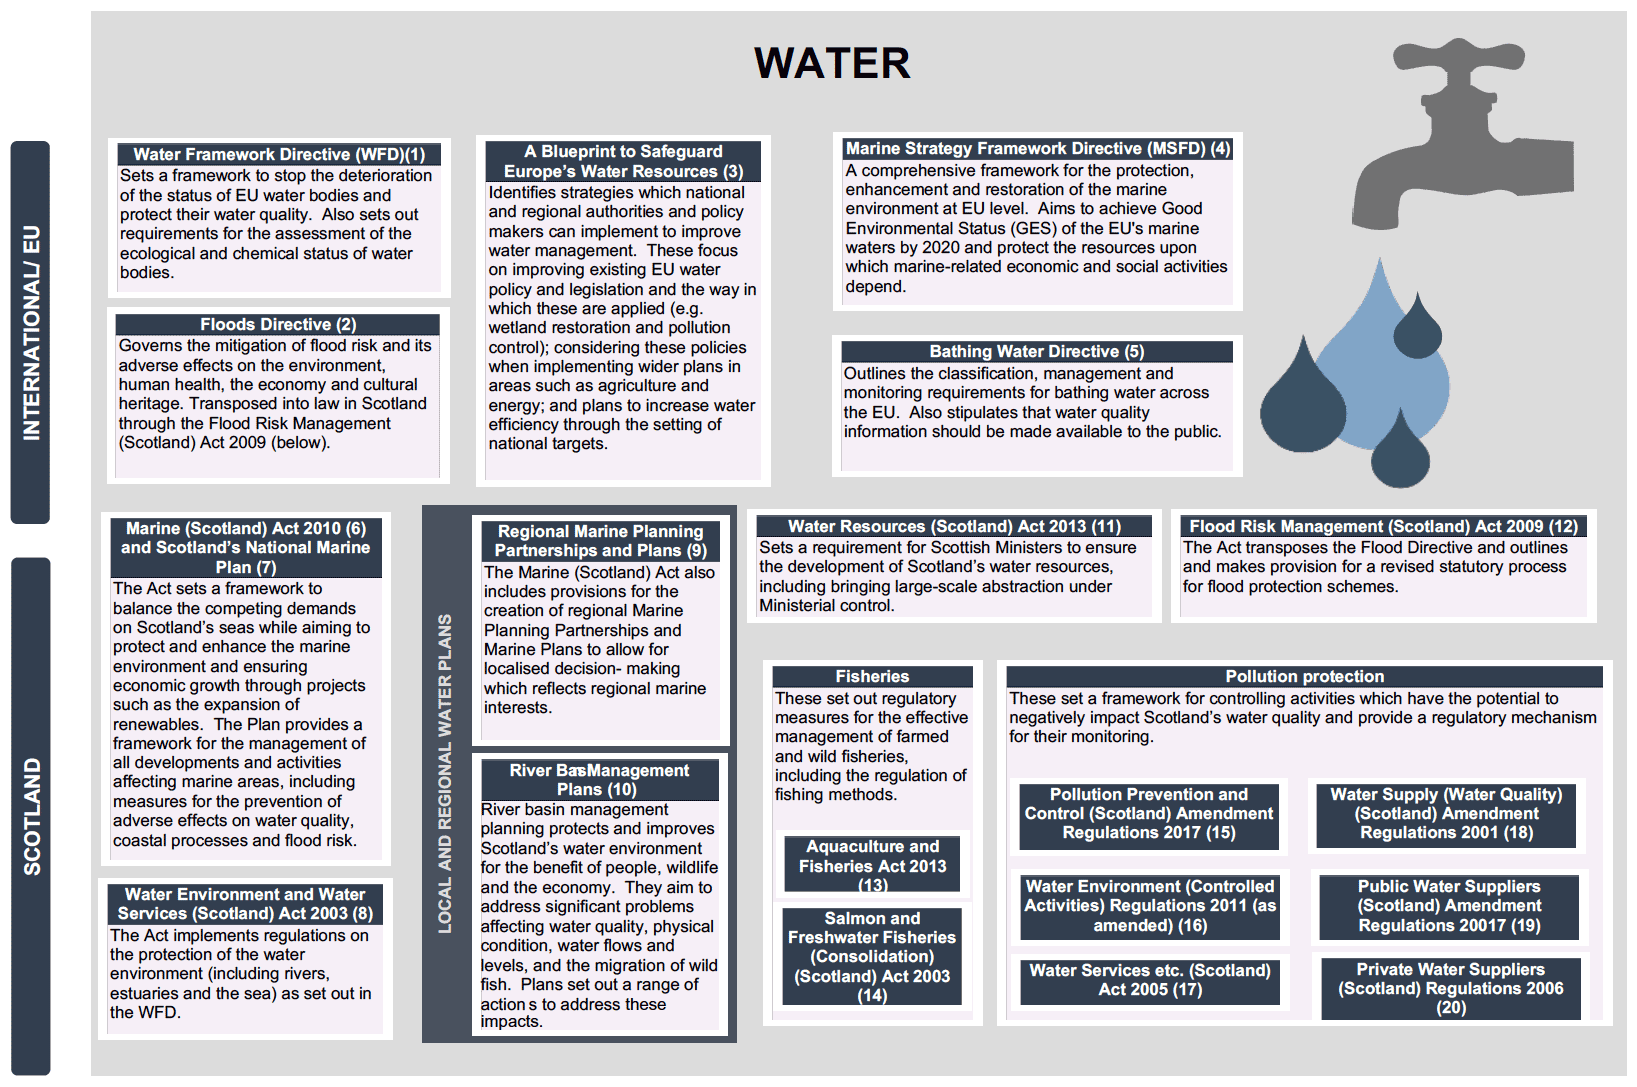 Figure 5: Environmental objectives for water